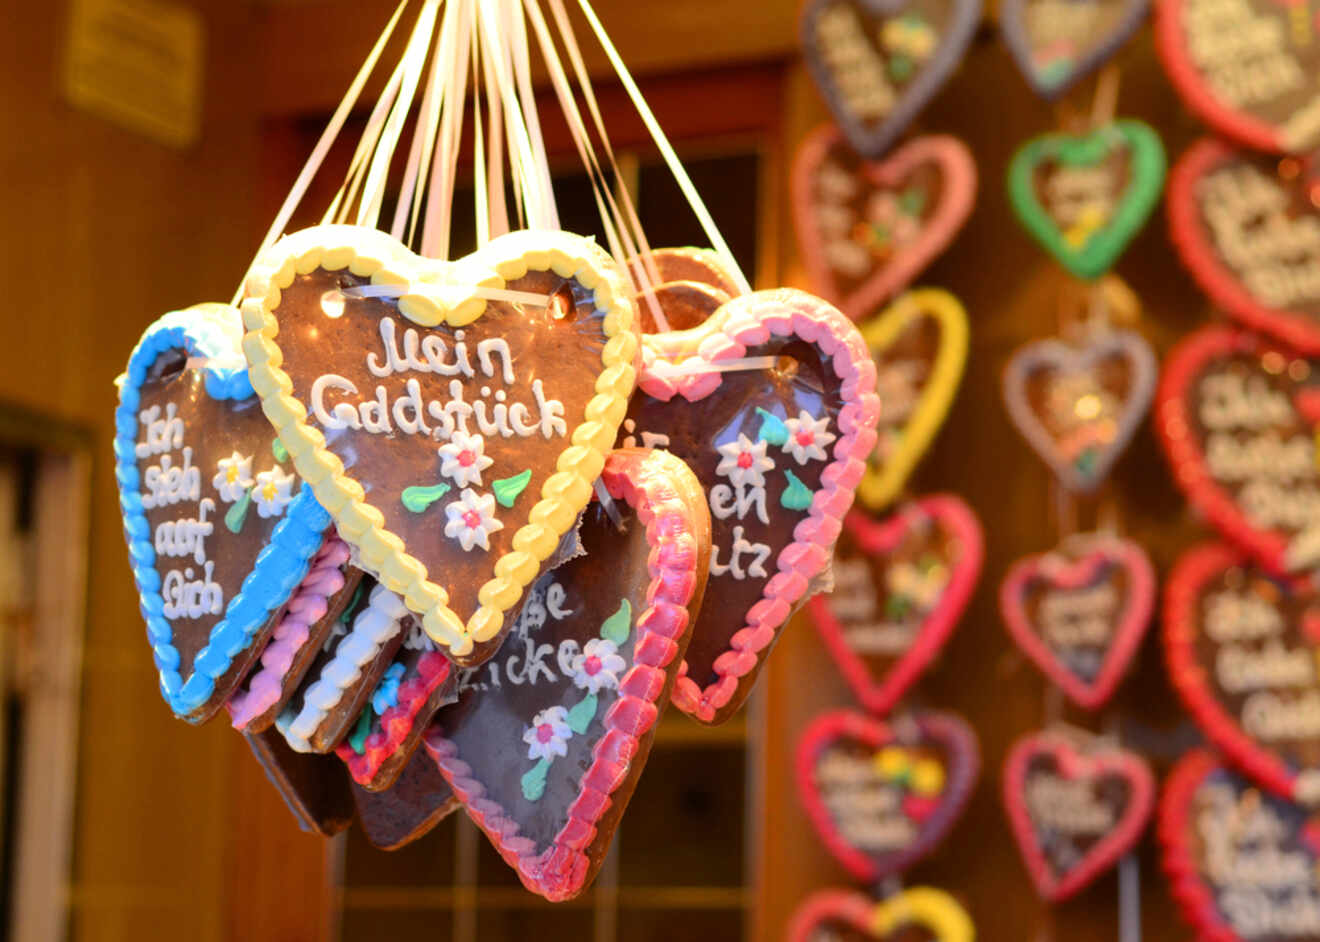 German gingerbreads in the form of a heart